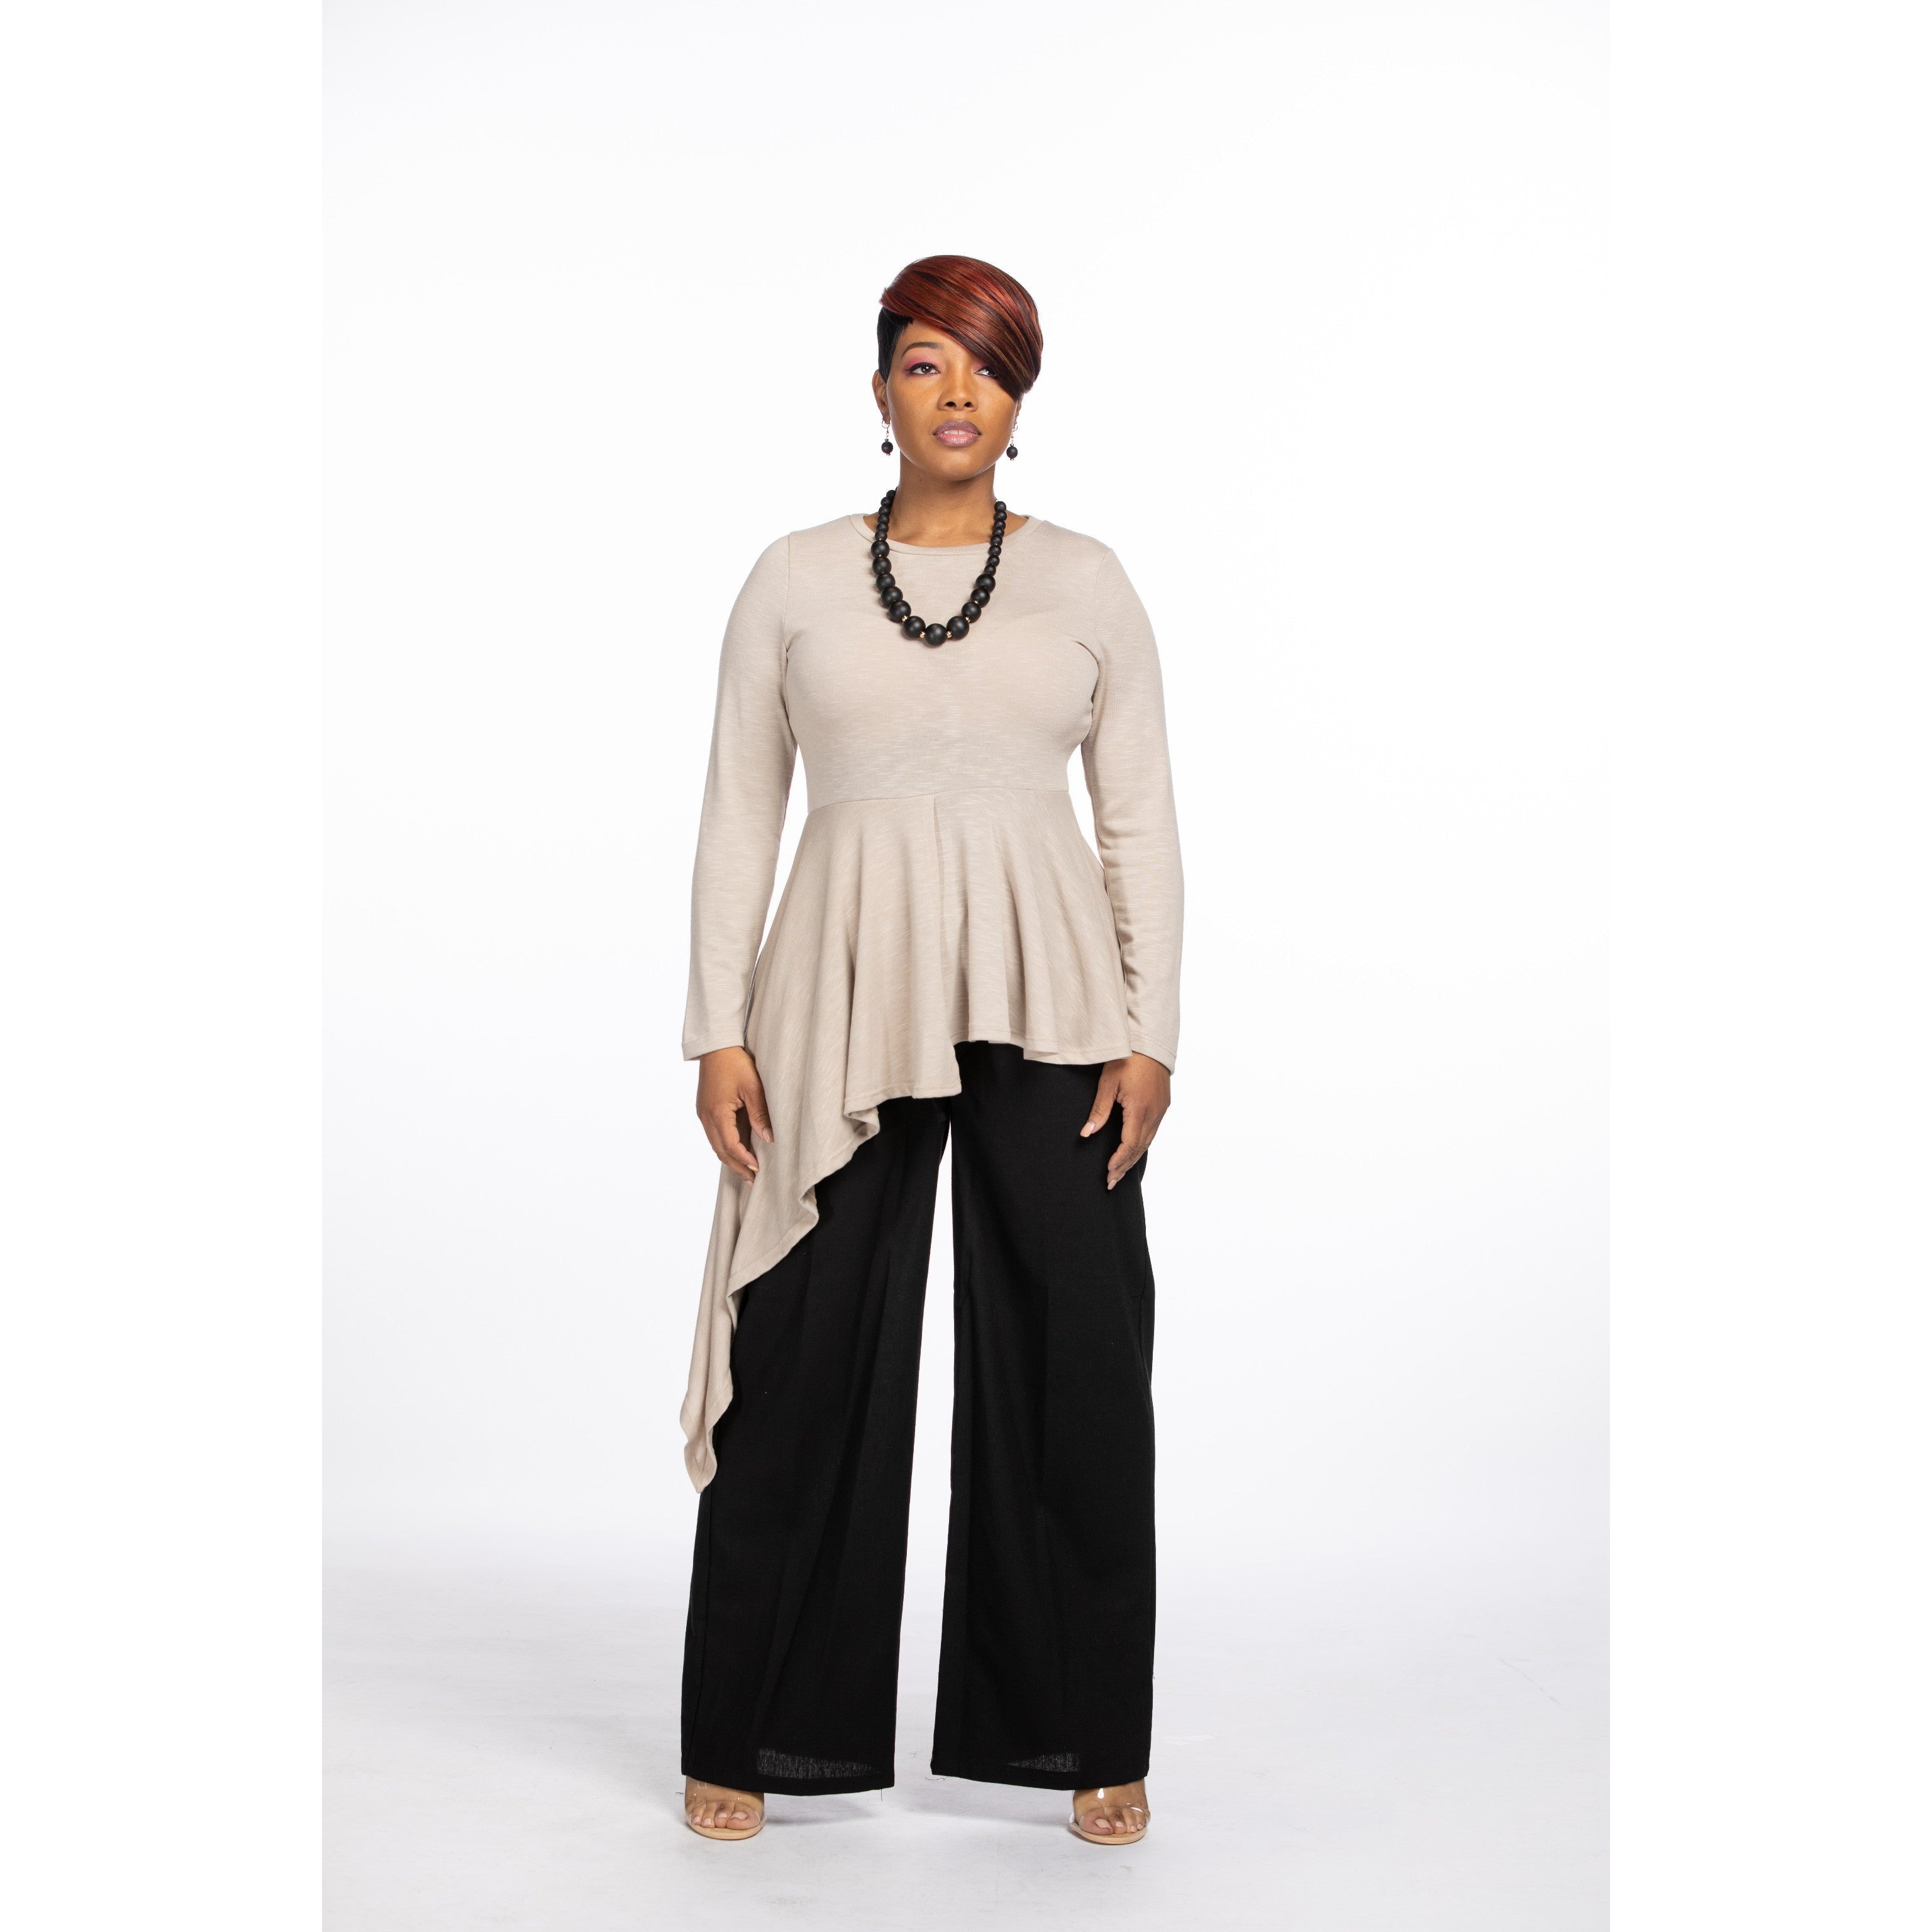 Flare Linen Blend Pants - Ariya's Apparel and Accessories